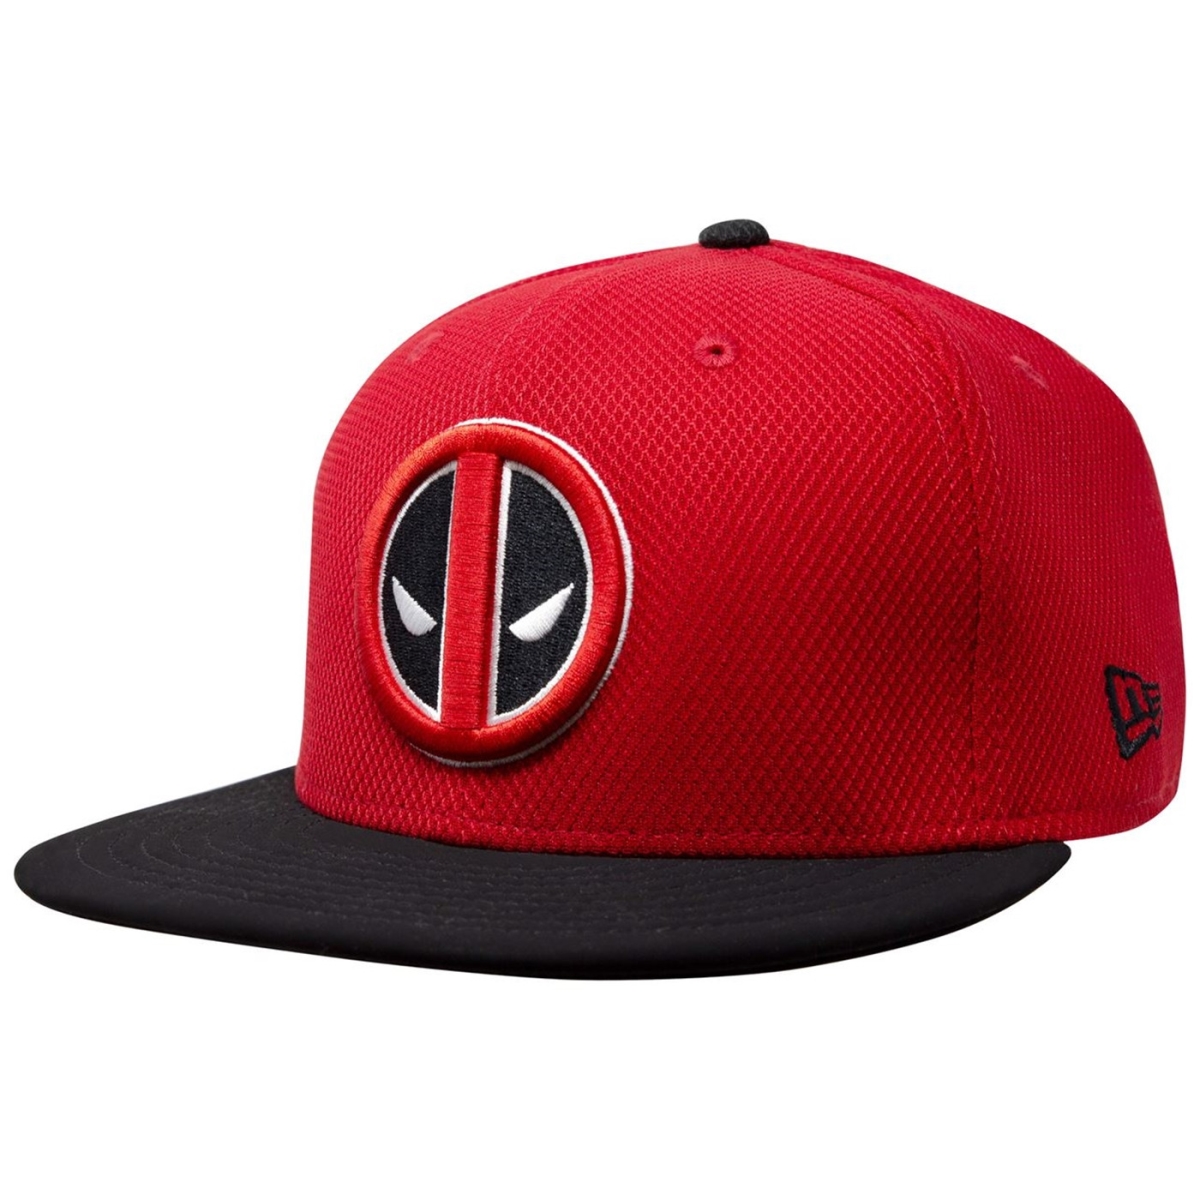 hatdpsymrb5950-712-7 1-2 Fitted  Symbol Red & Black 59Fifty Fitted Hat - Size 7.5 -  Deadpool